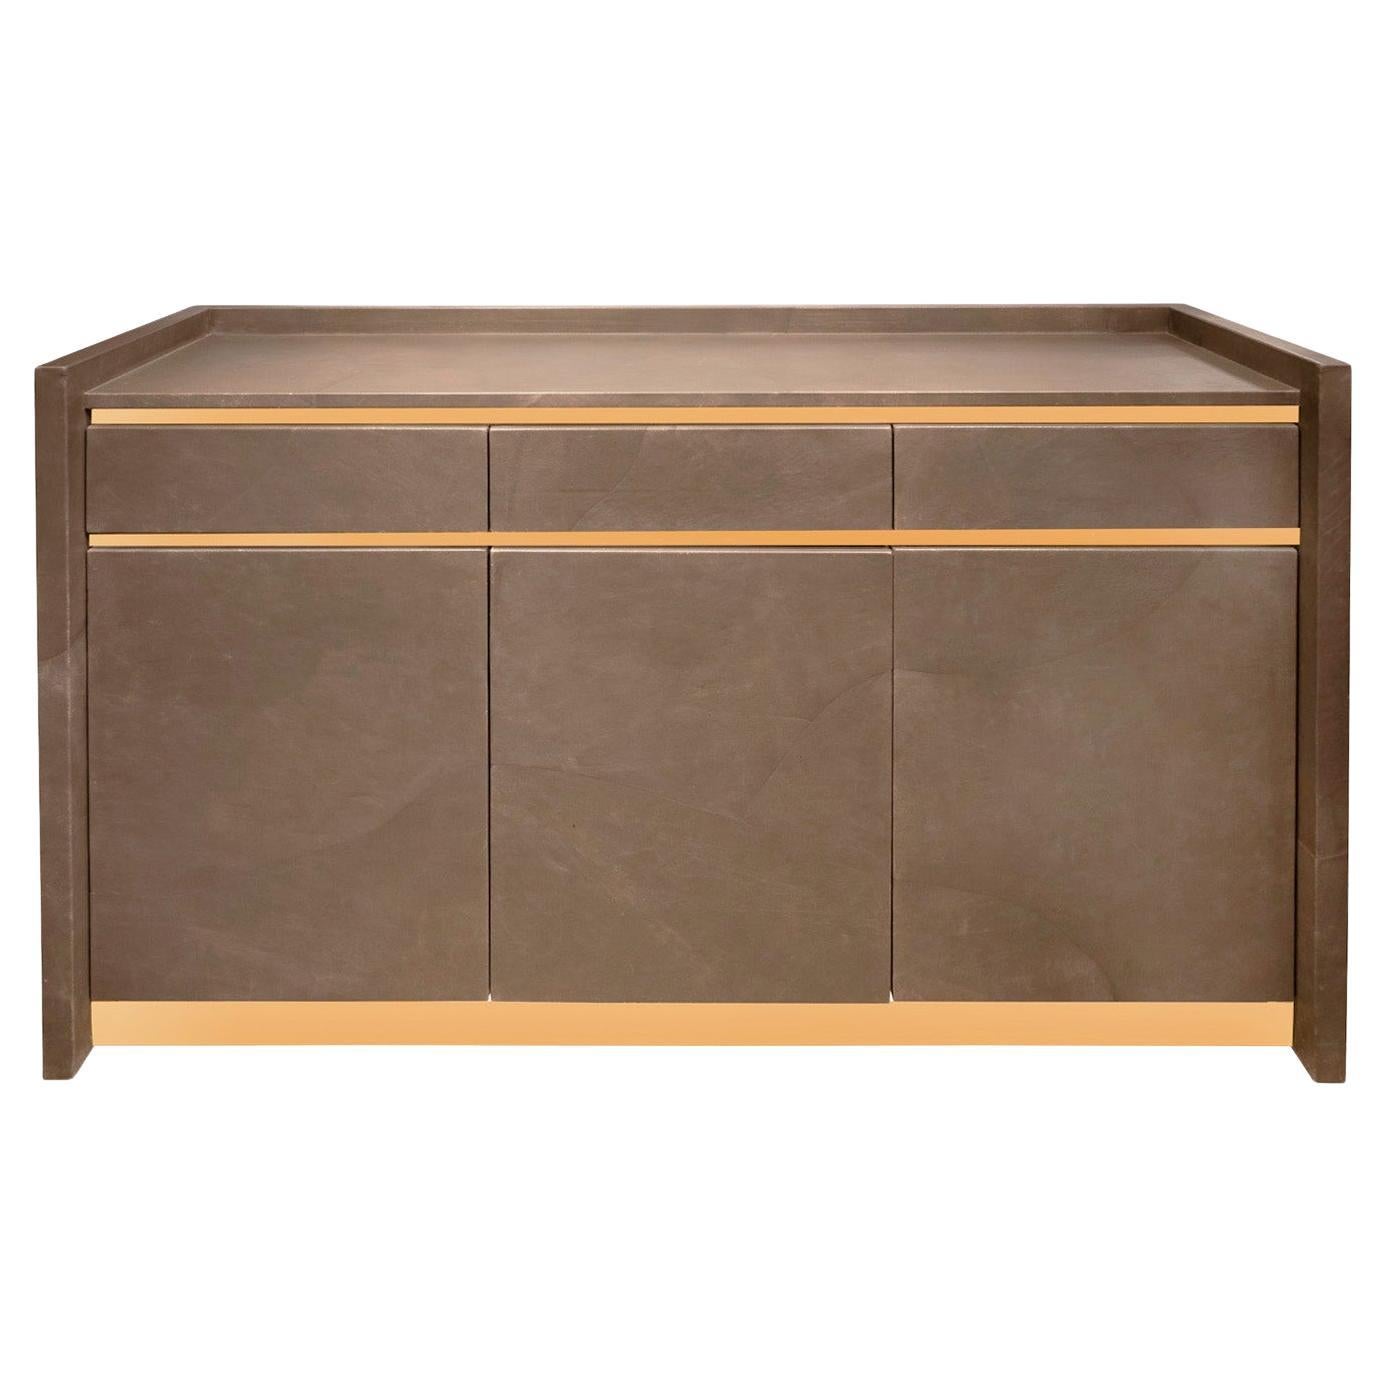 Karl Springer Rare Credenza in Taupe Leather and Brass 1985 'Signed and Dated'